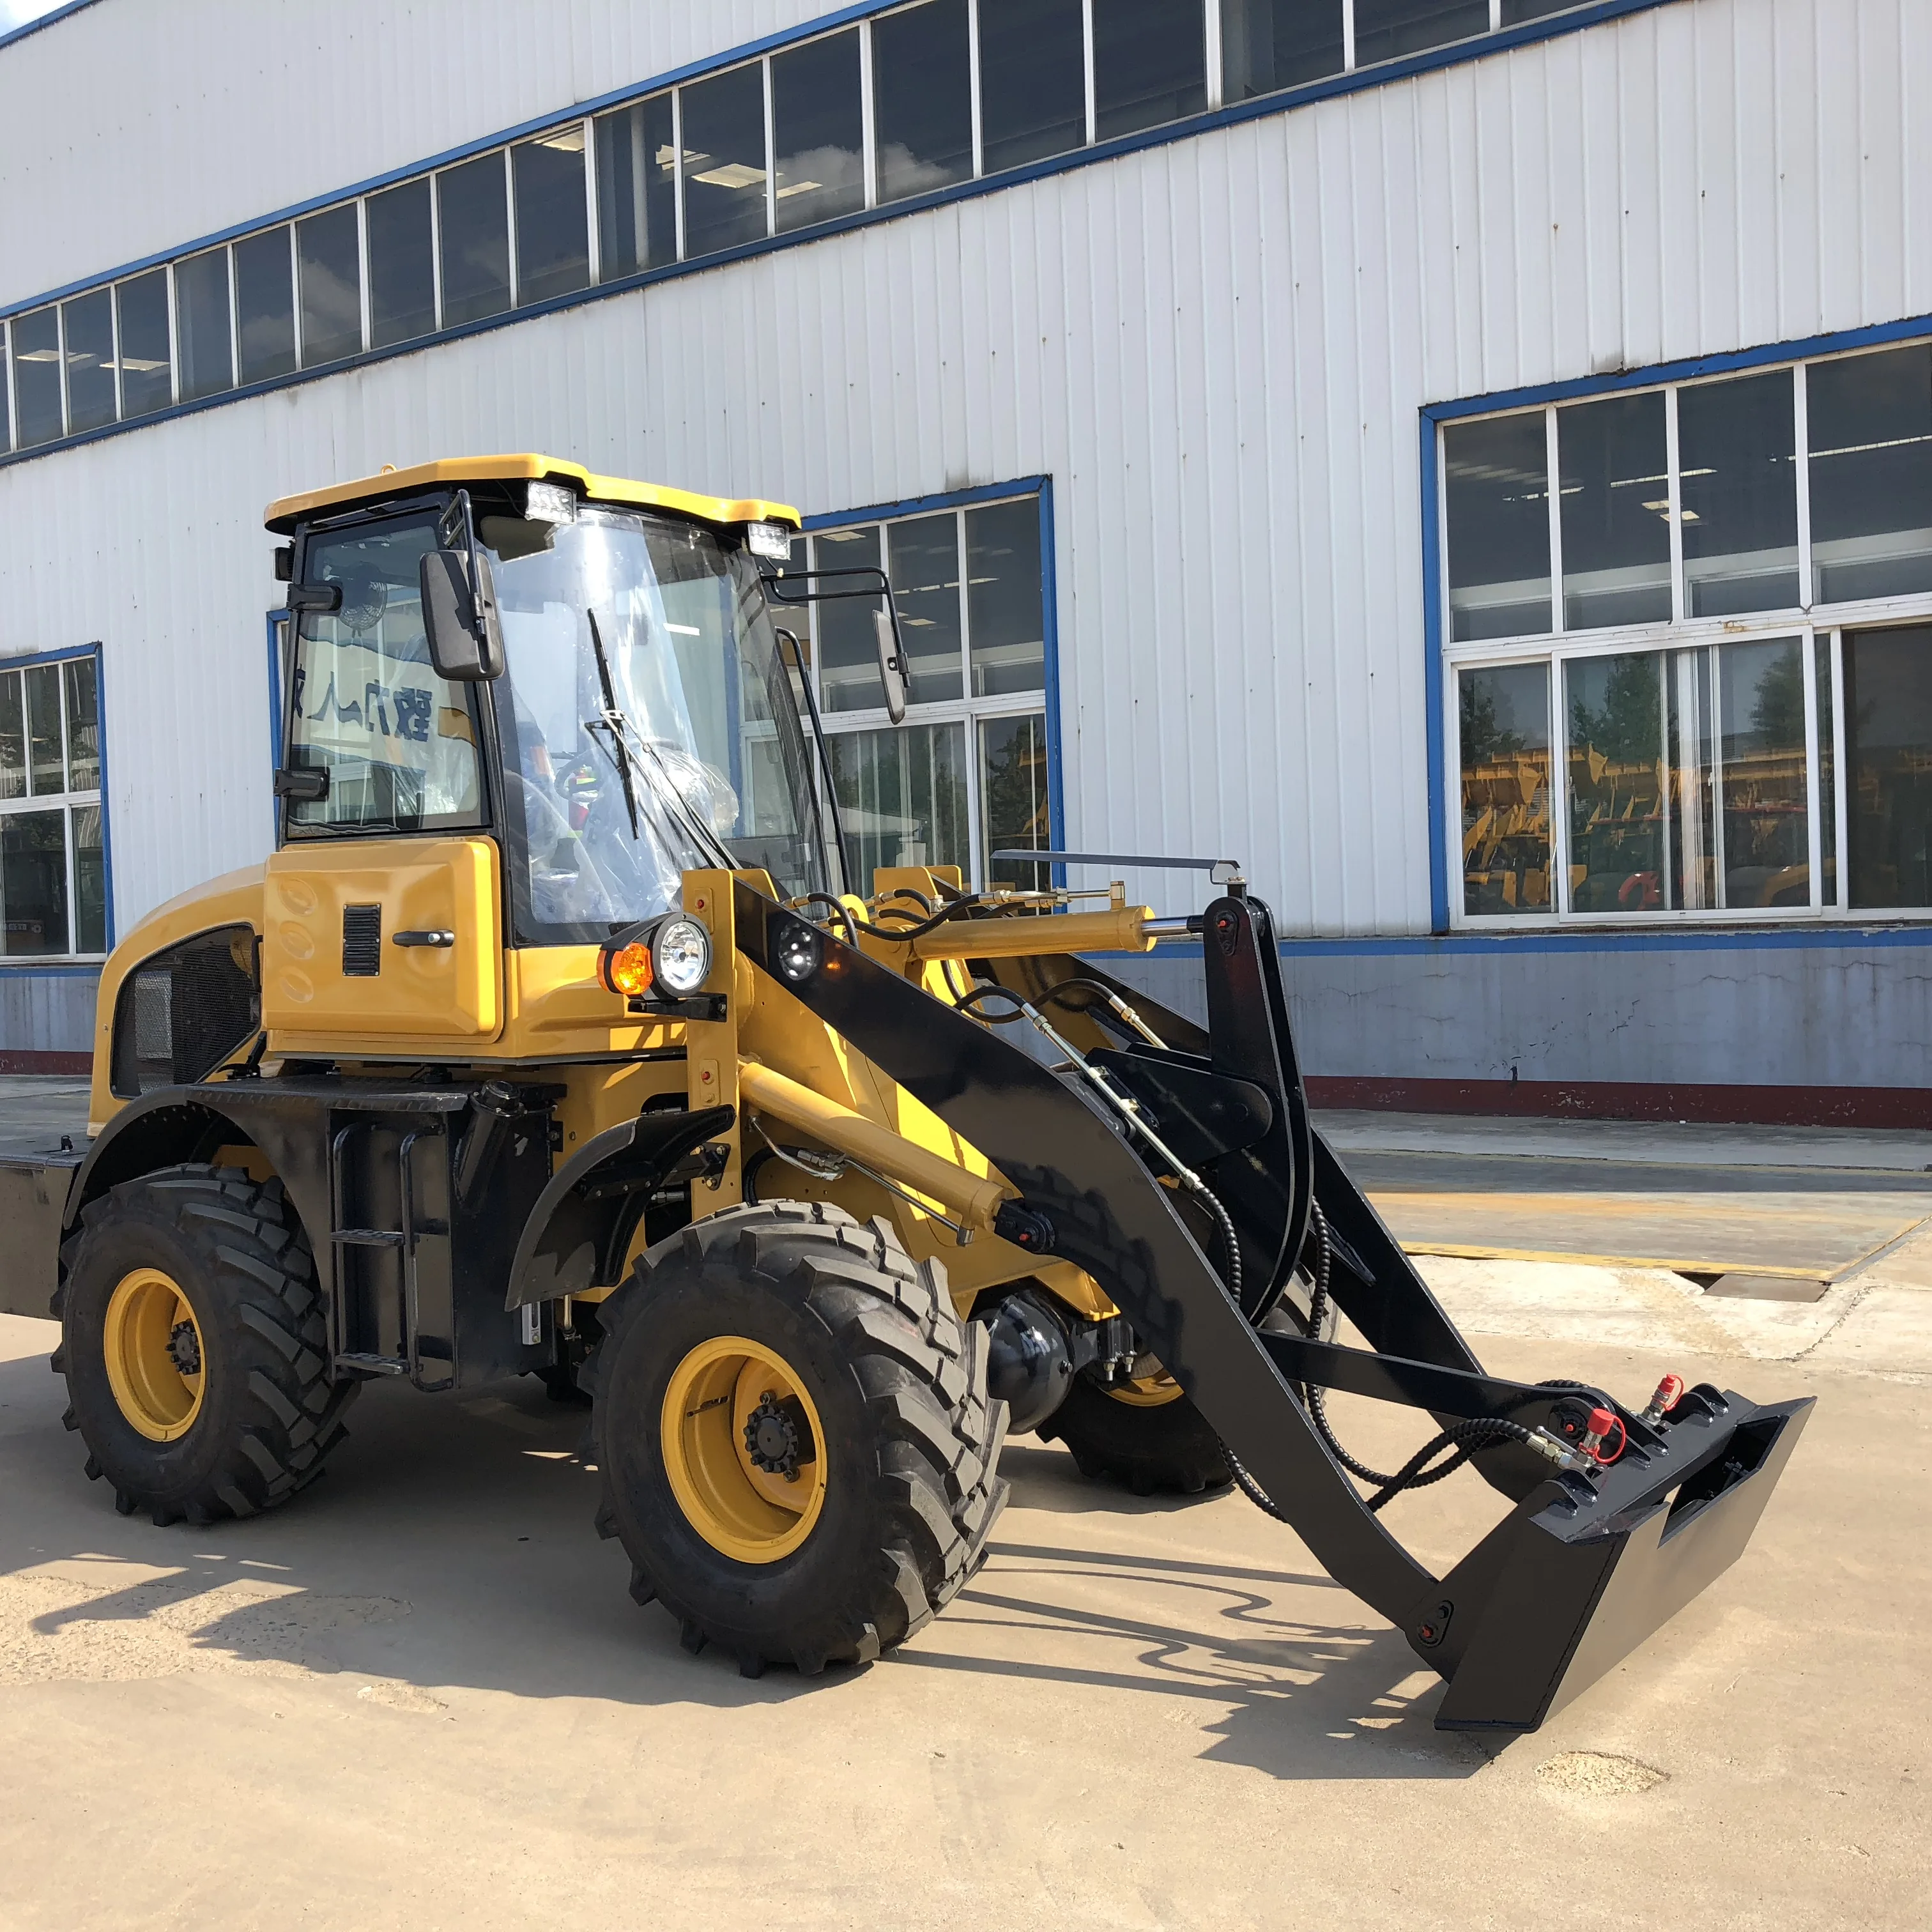 Qingzhou Zl12f Mini Wheel Loader Prices Compact Loader For Sale Buy Mini Wheel Loader,Wheel